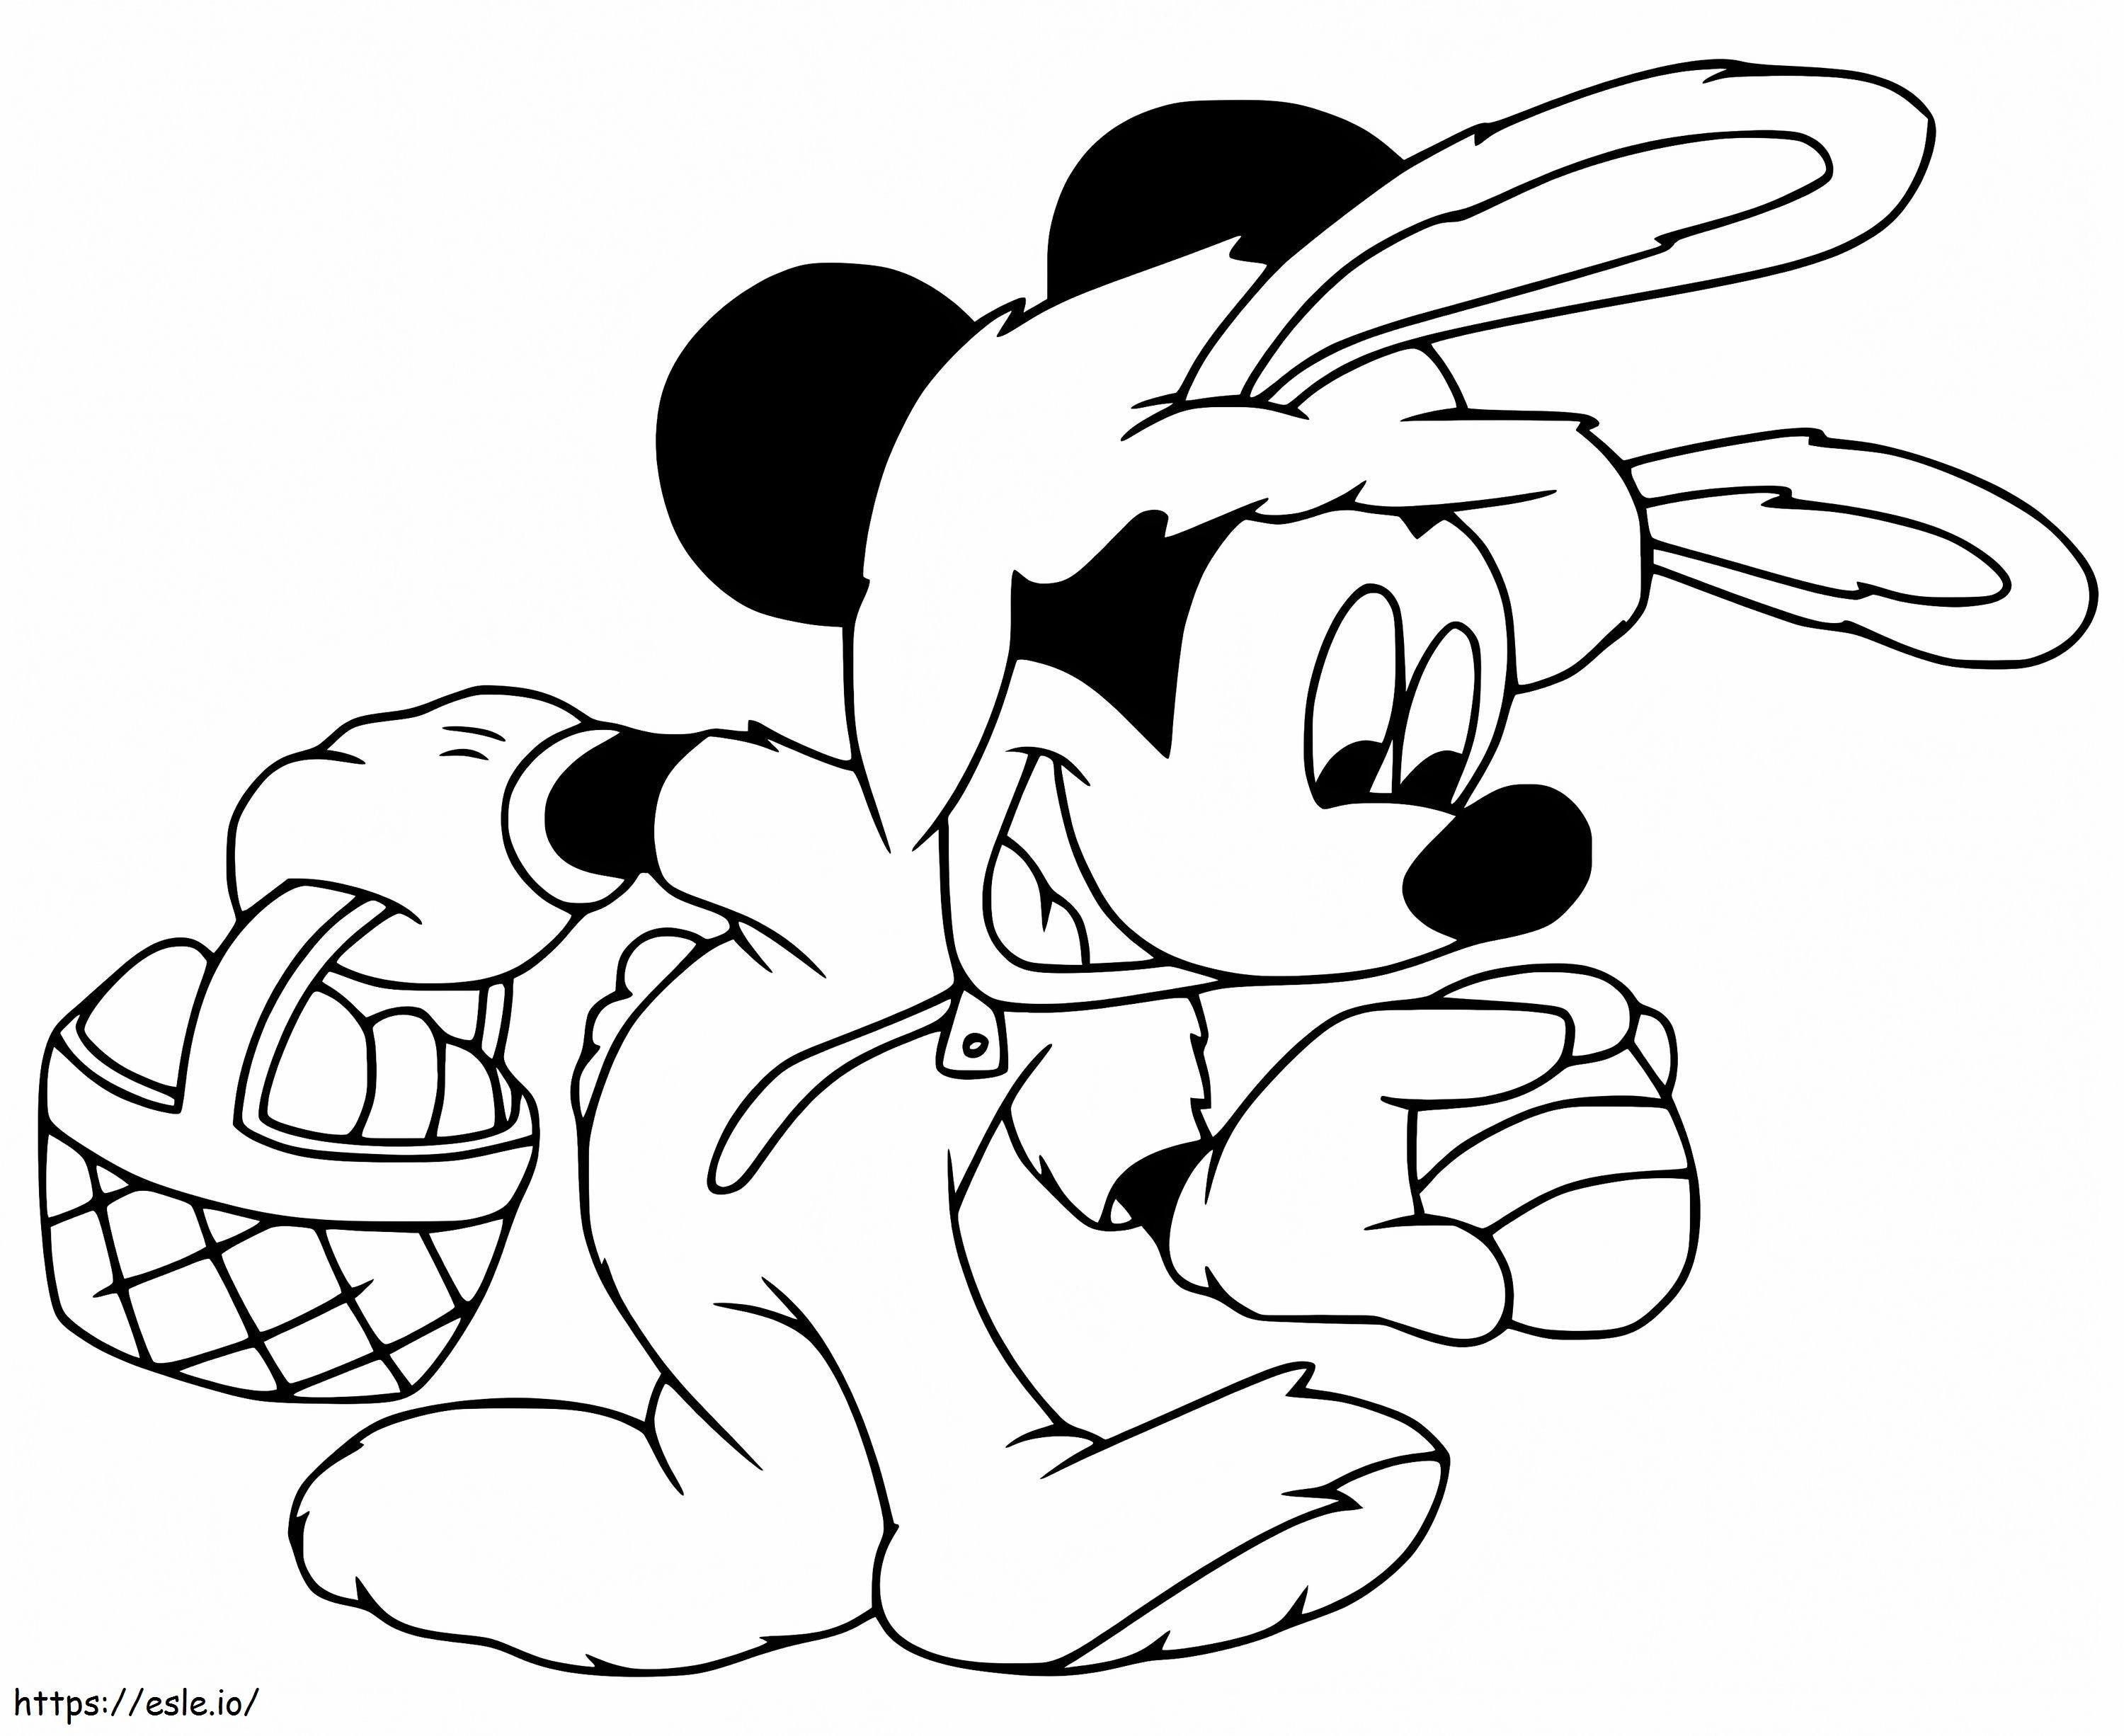 Mickey Mouse Collecting Easter Eggs coloring page